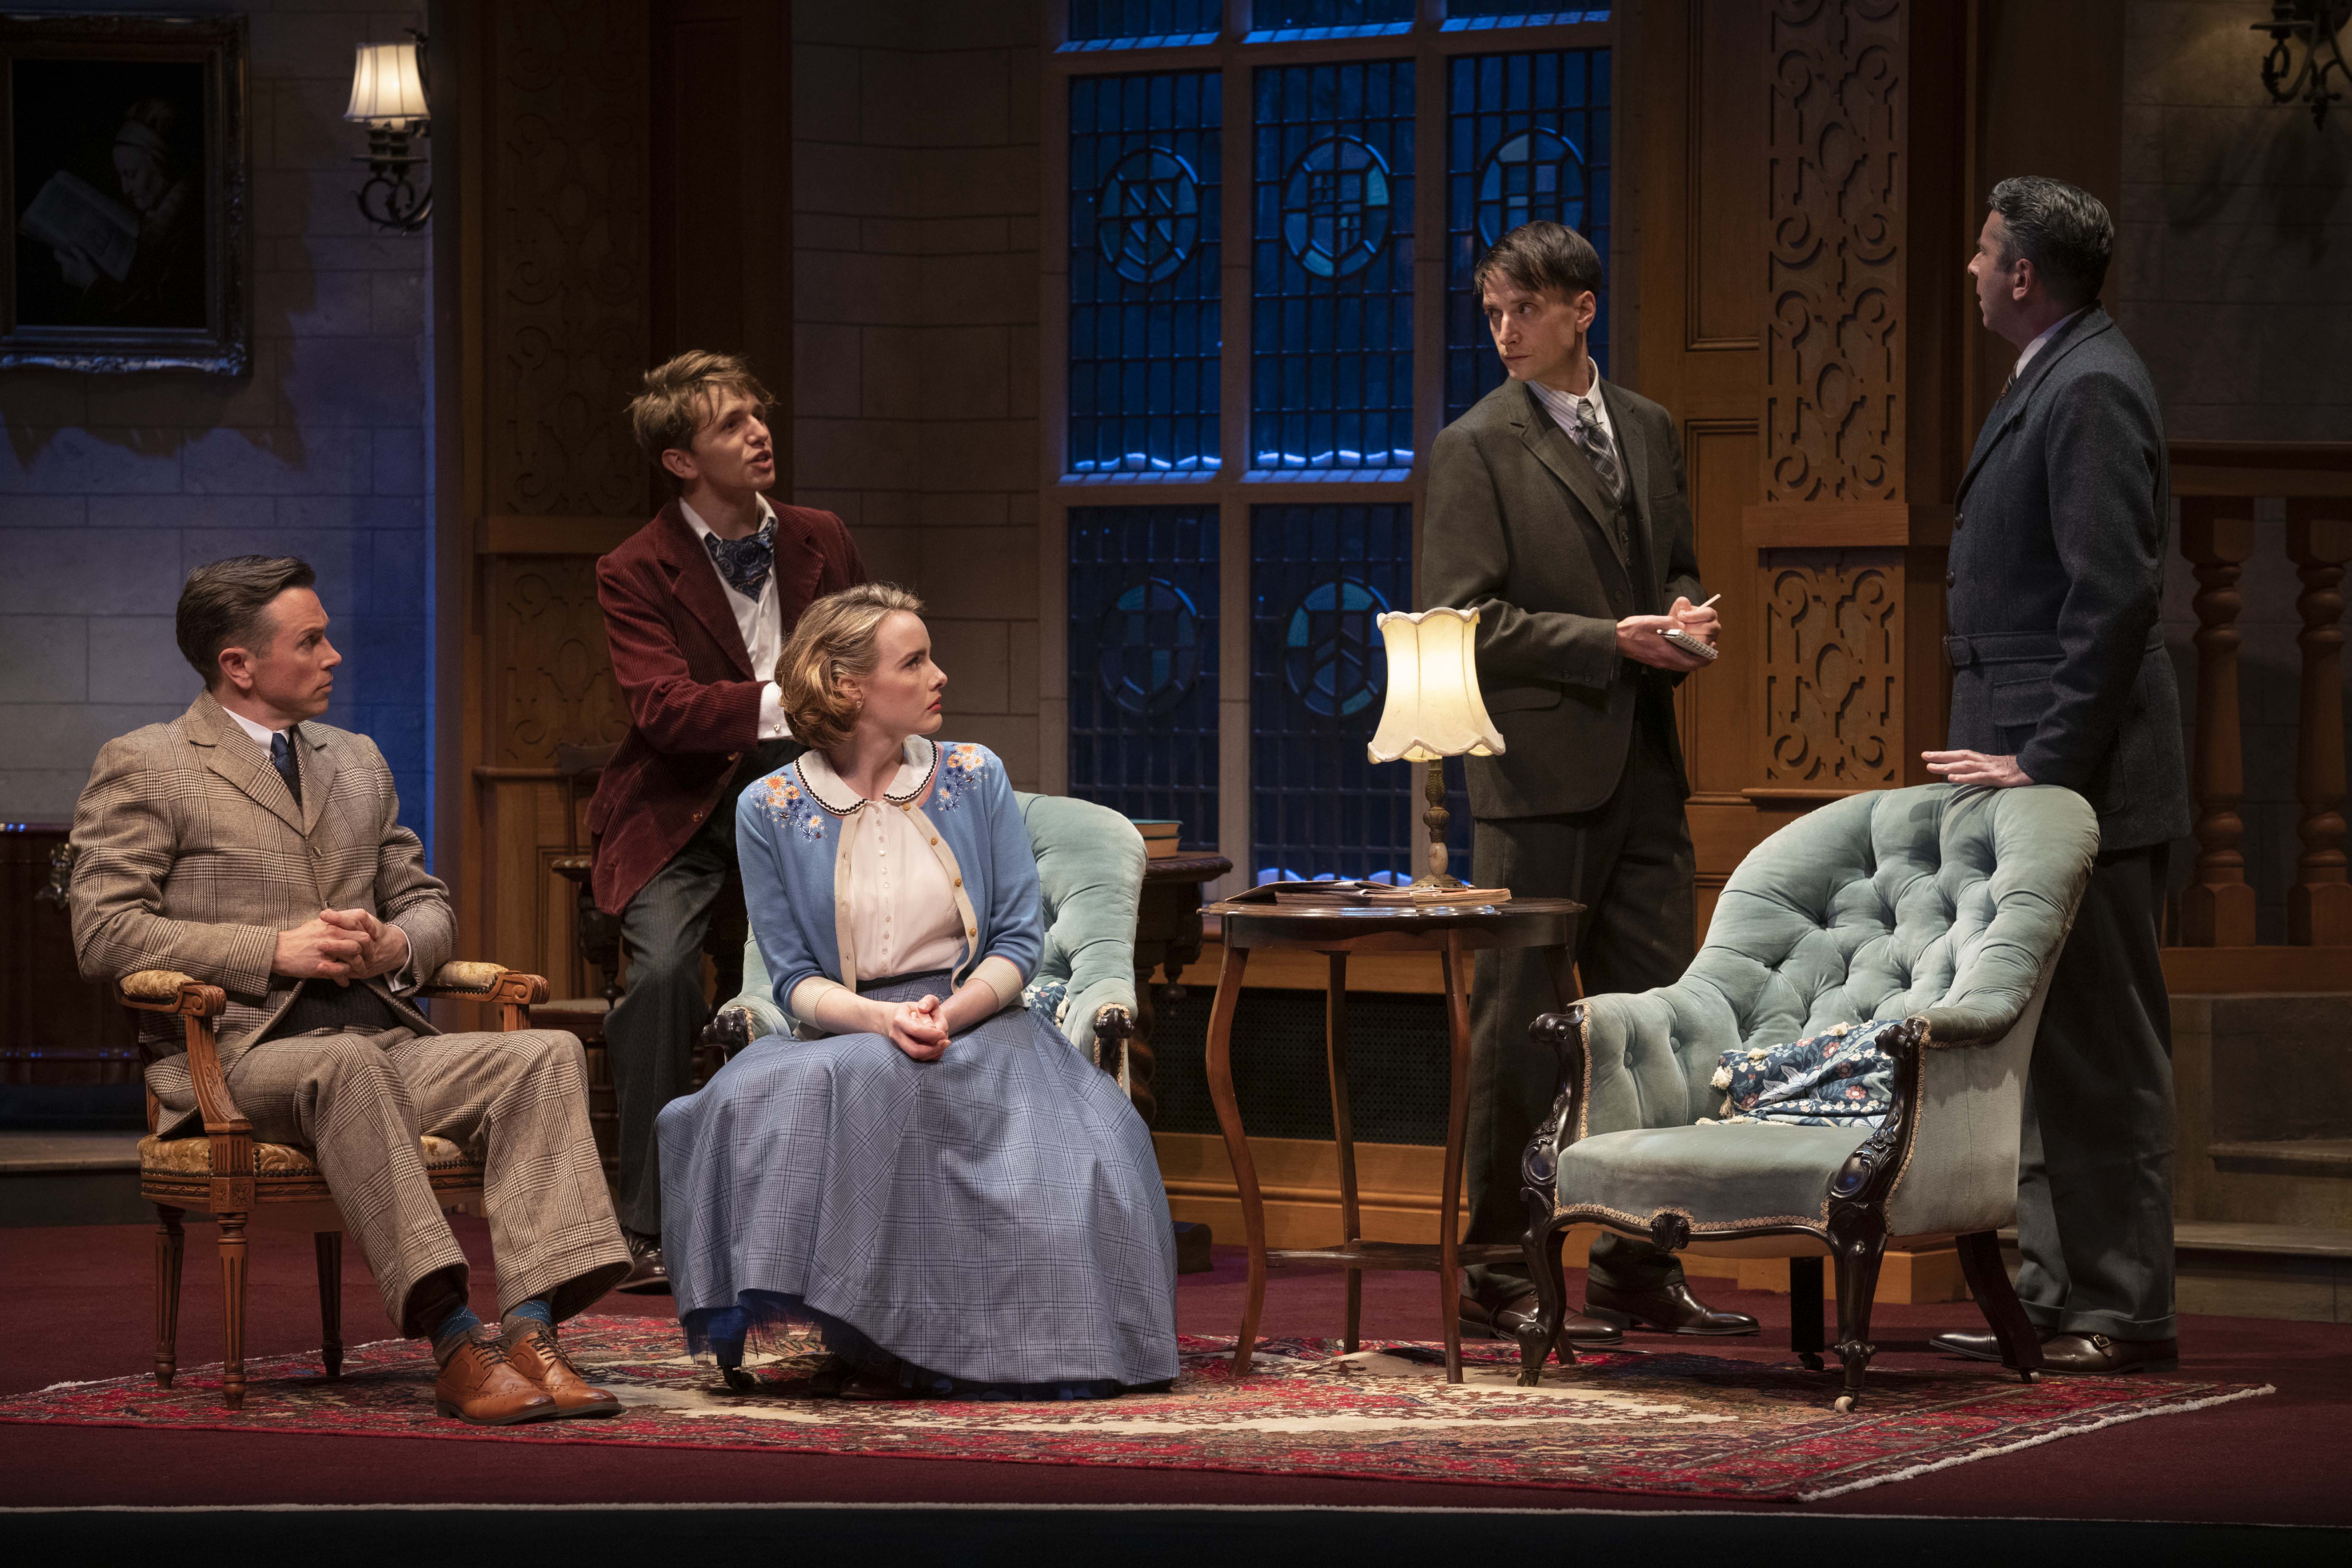 https://www.artshub.com.au/wp-content/uploads/sites/2/2022/10/Alex-Rathgeber-Laurence-Boxhall-Anna-OByrne-Tom-Conroy-Adam-Murphy-in-THE-MOUSETRAP-c-Brian-Geach.jpg